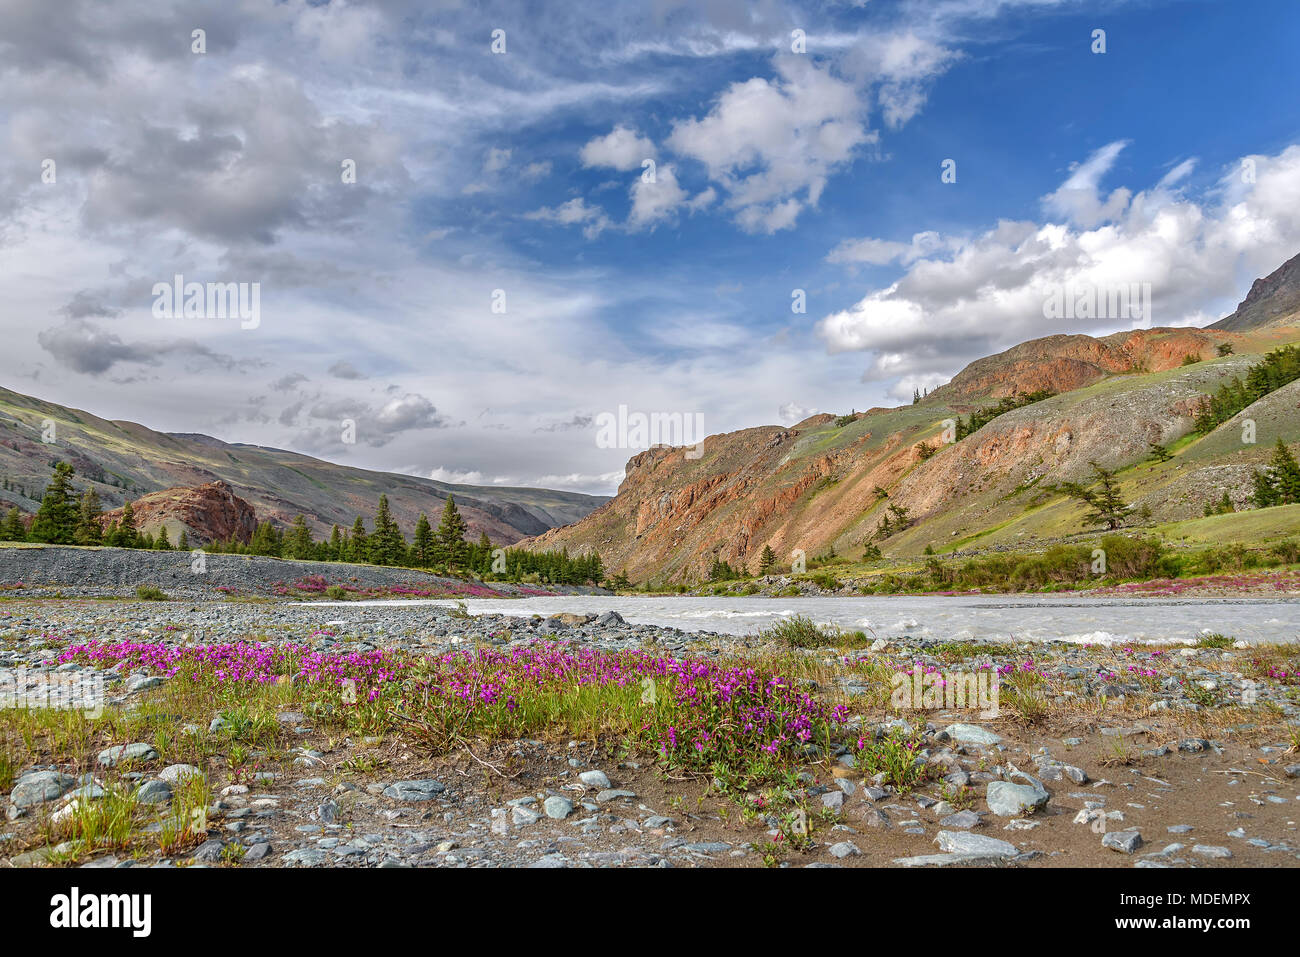 Bright pink flowers Epilobium among the stones on the river bank against the backdrop of mountains, trees, blue sky and clouds Stock Photo